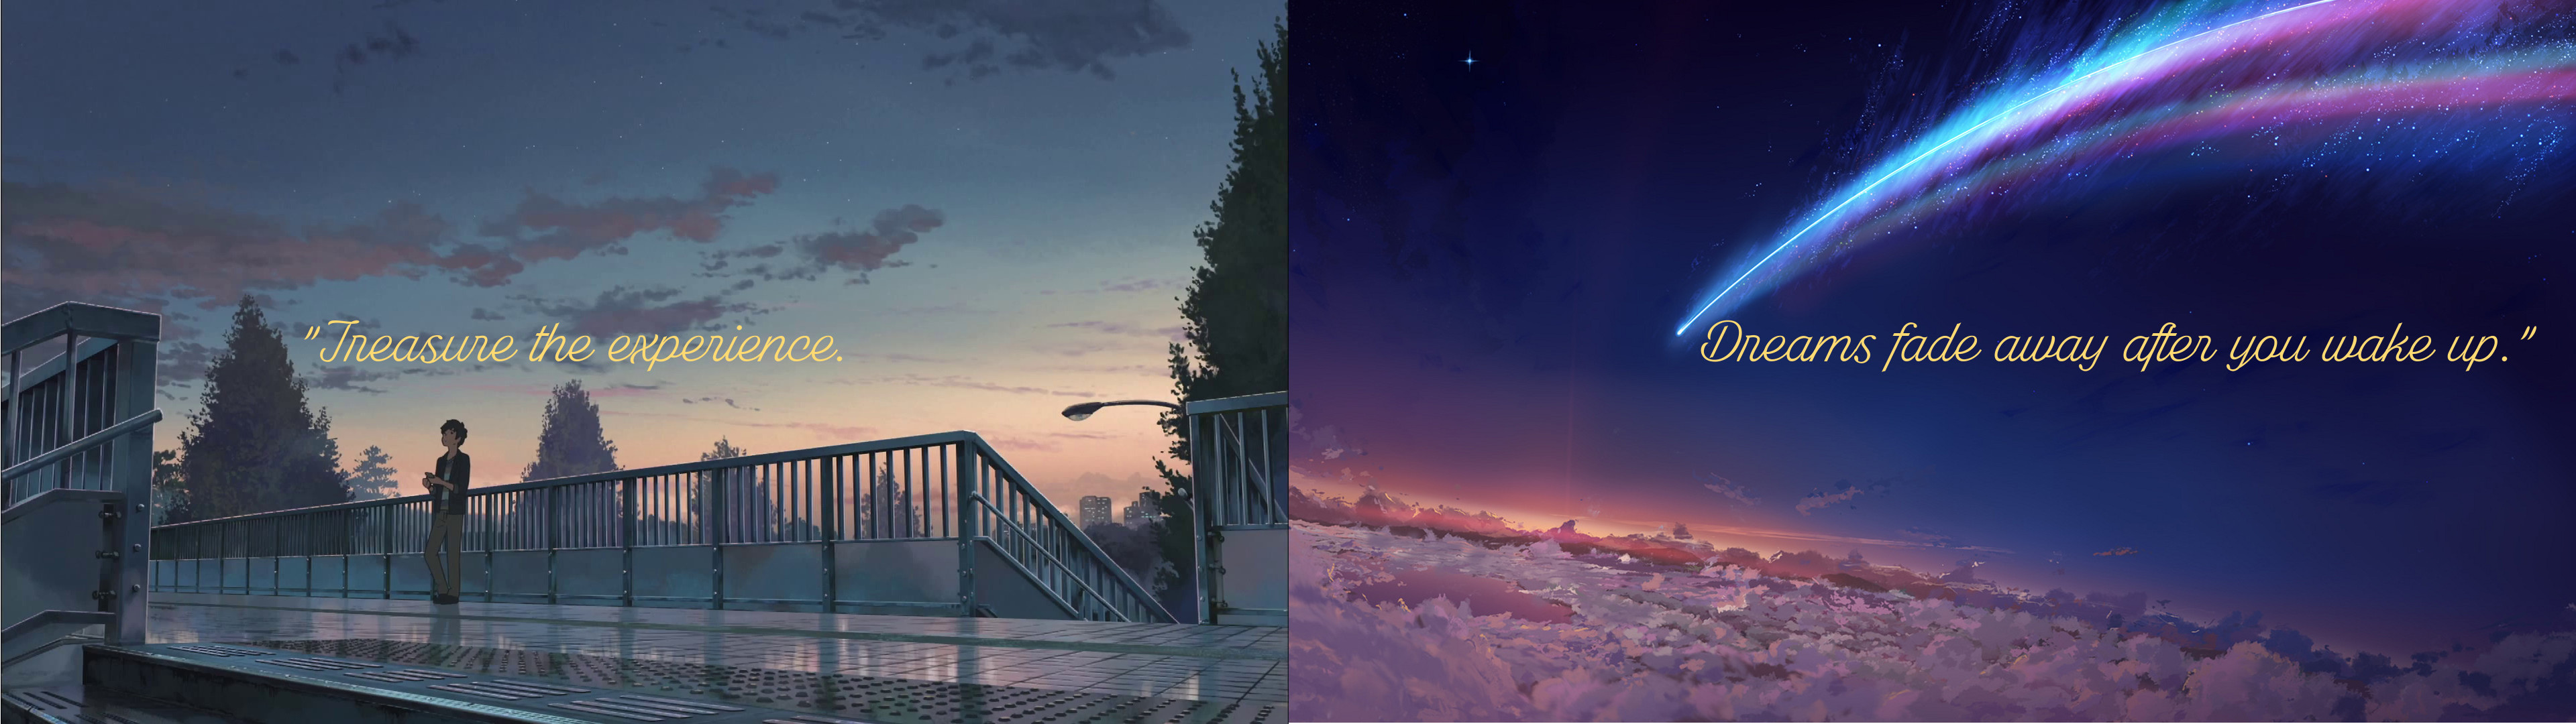 3840x1080 "Your name" dual monitor wallpaper.